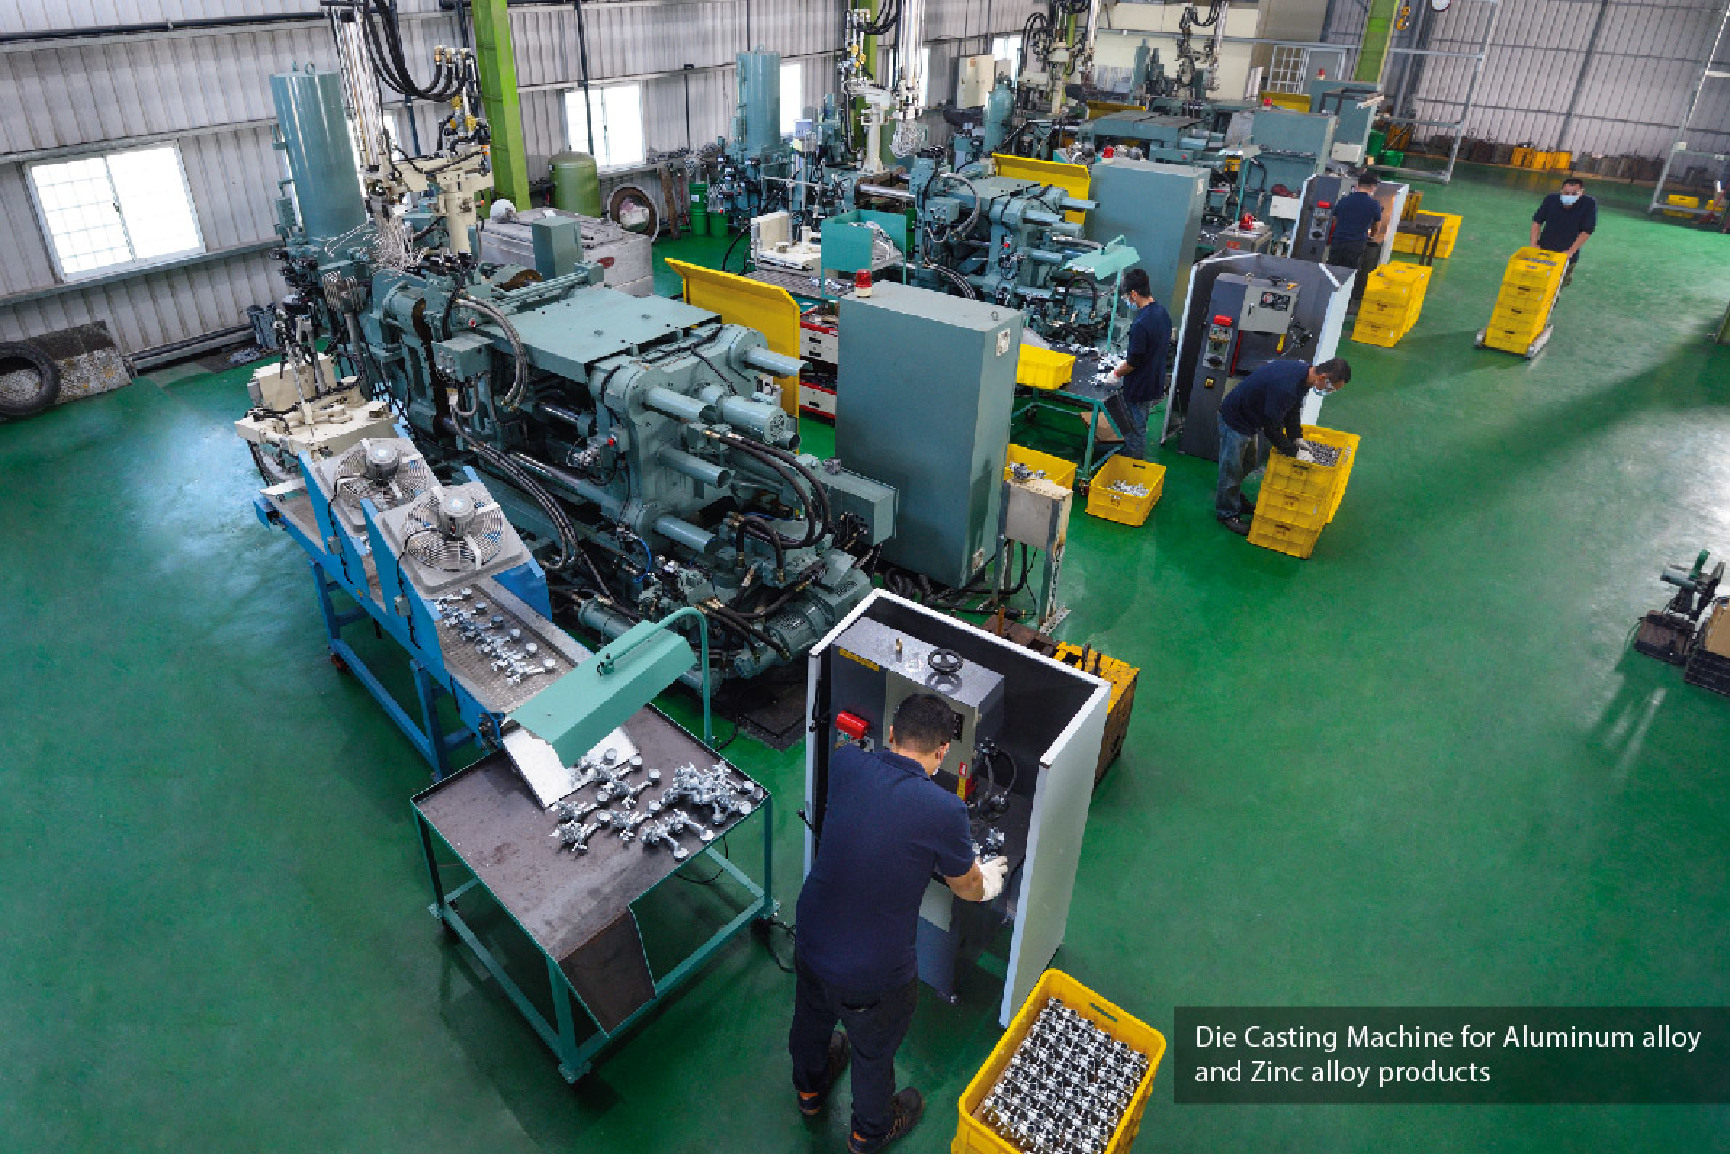 Die casting - Die Casting Machine for Aluminum alloy and Zinc alloy products